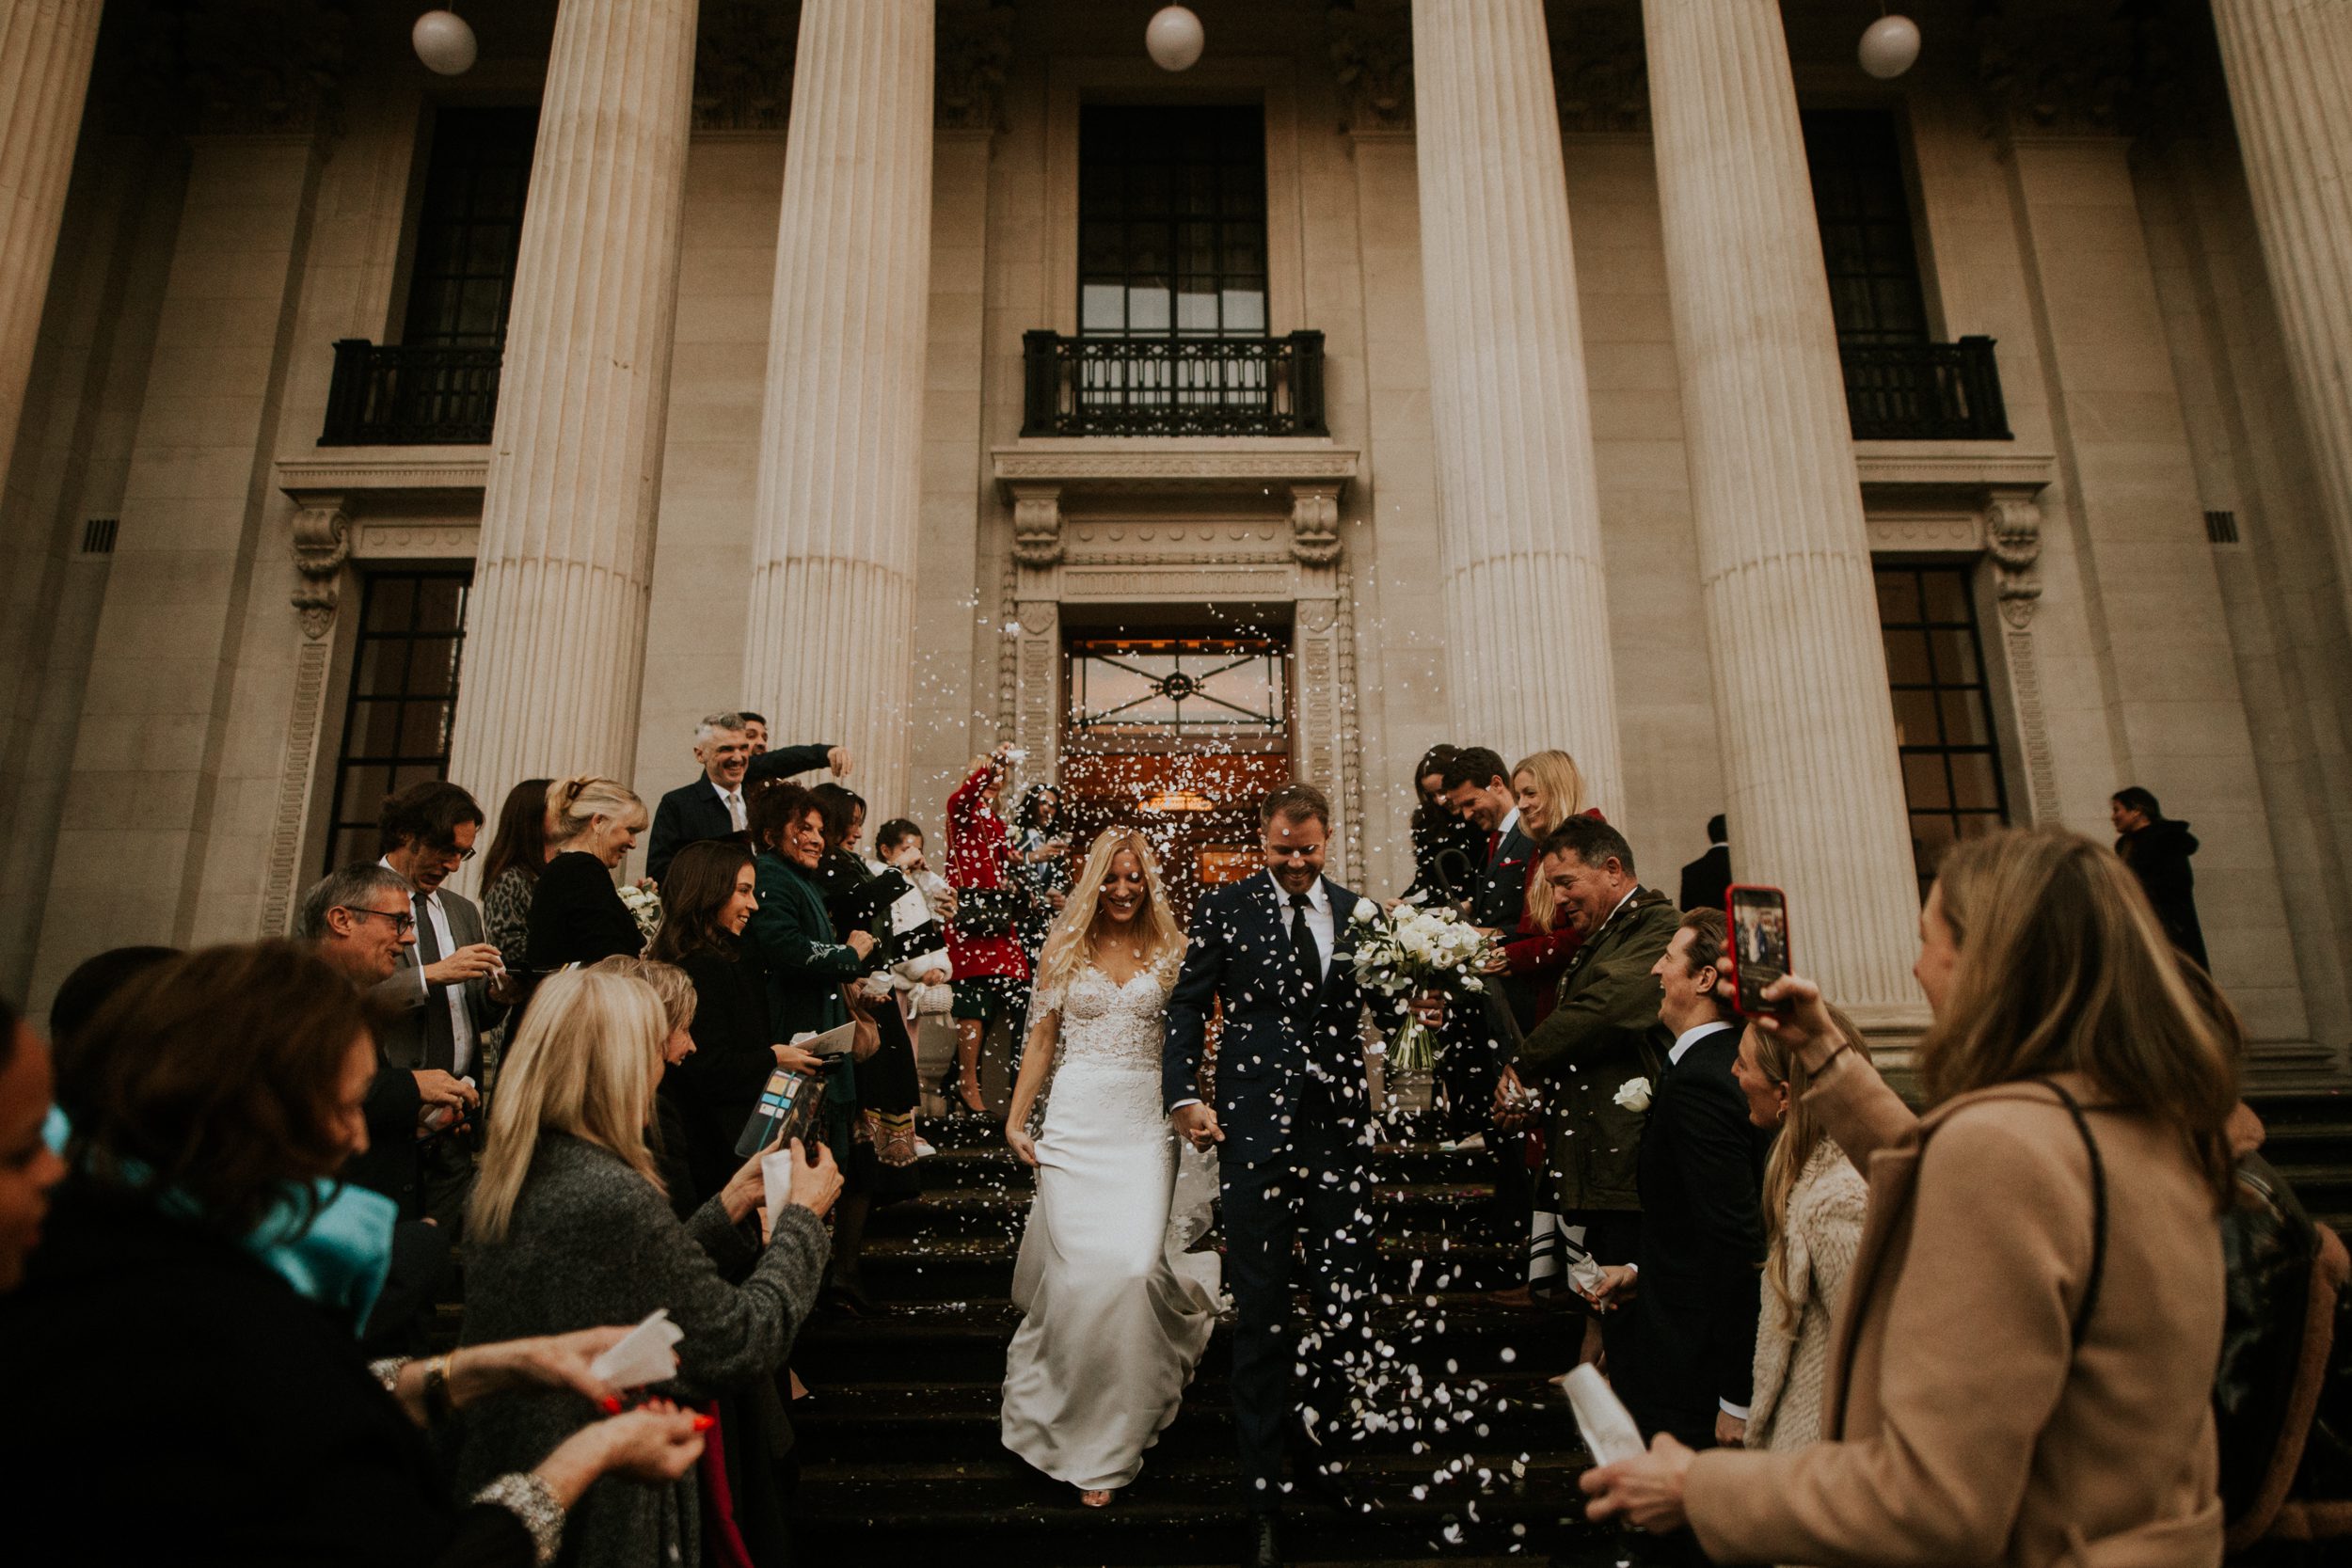 Well wishers shower a bride and groom with confetti as they leave their wedding at Old Marylebone Town Hall. Old Marylebone Town Hall wedding photography